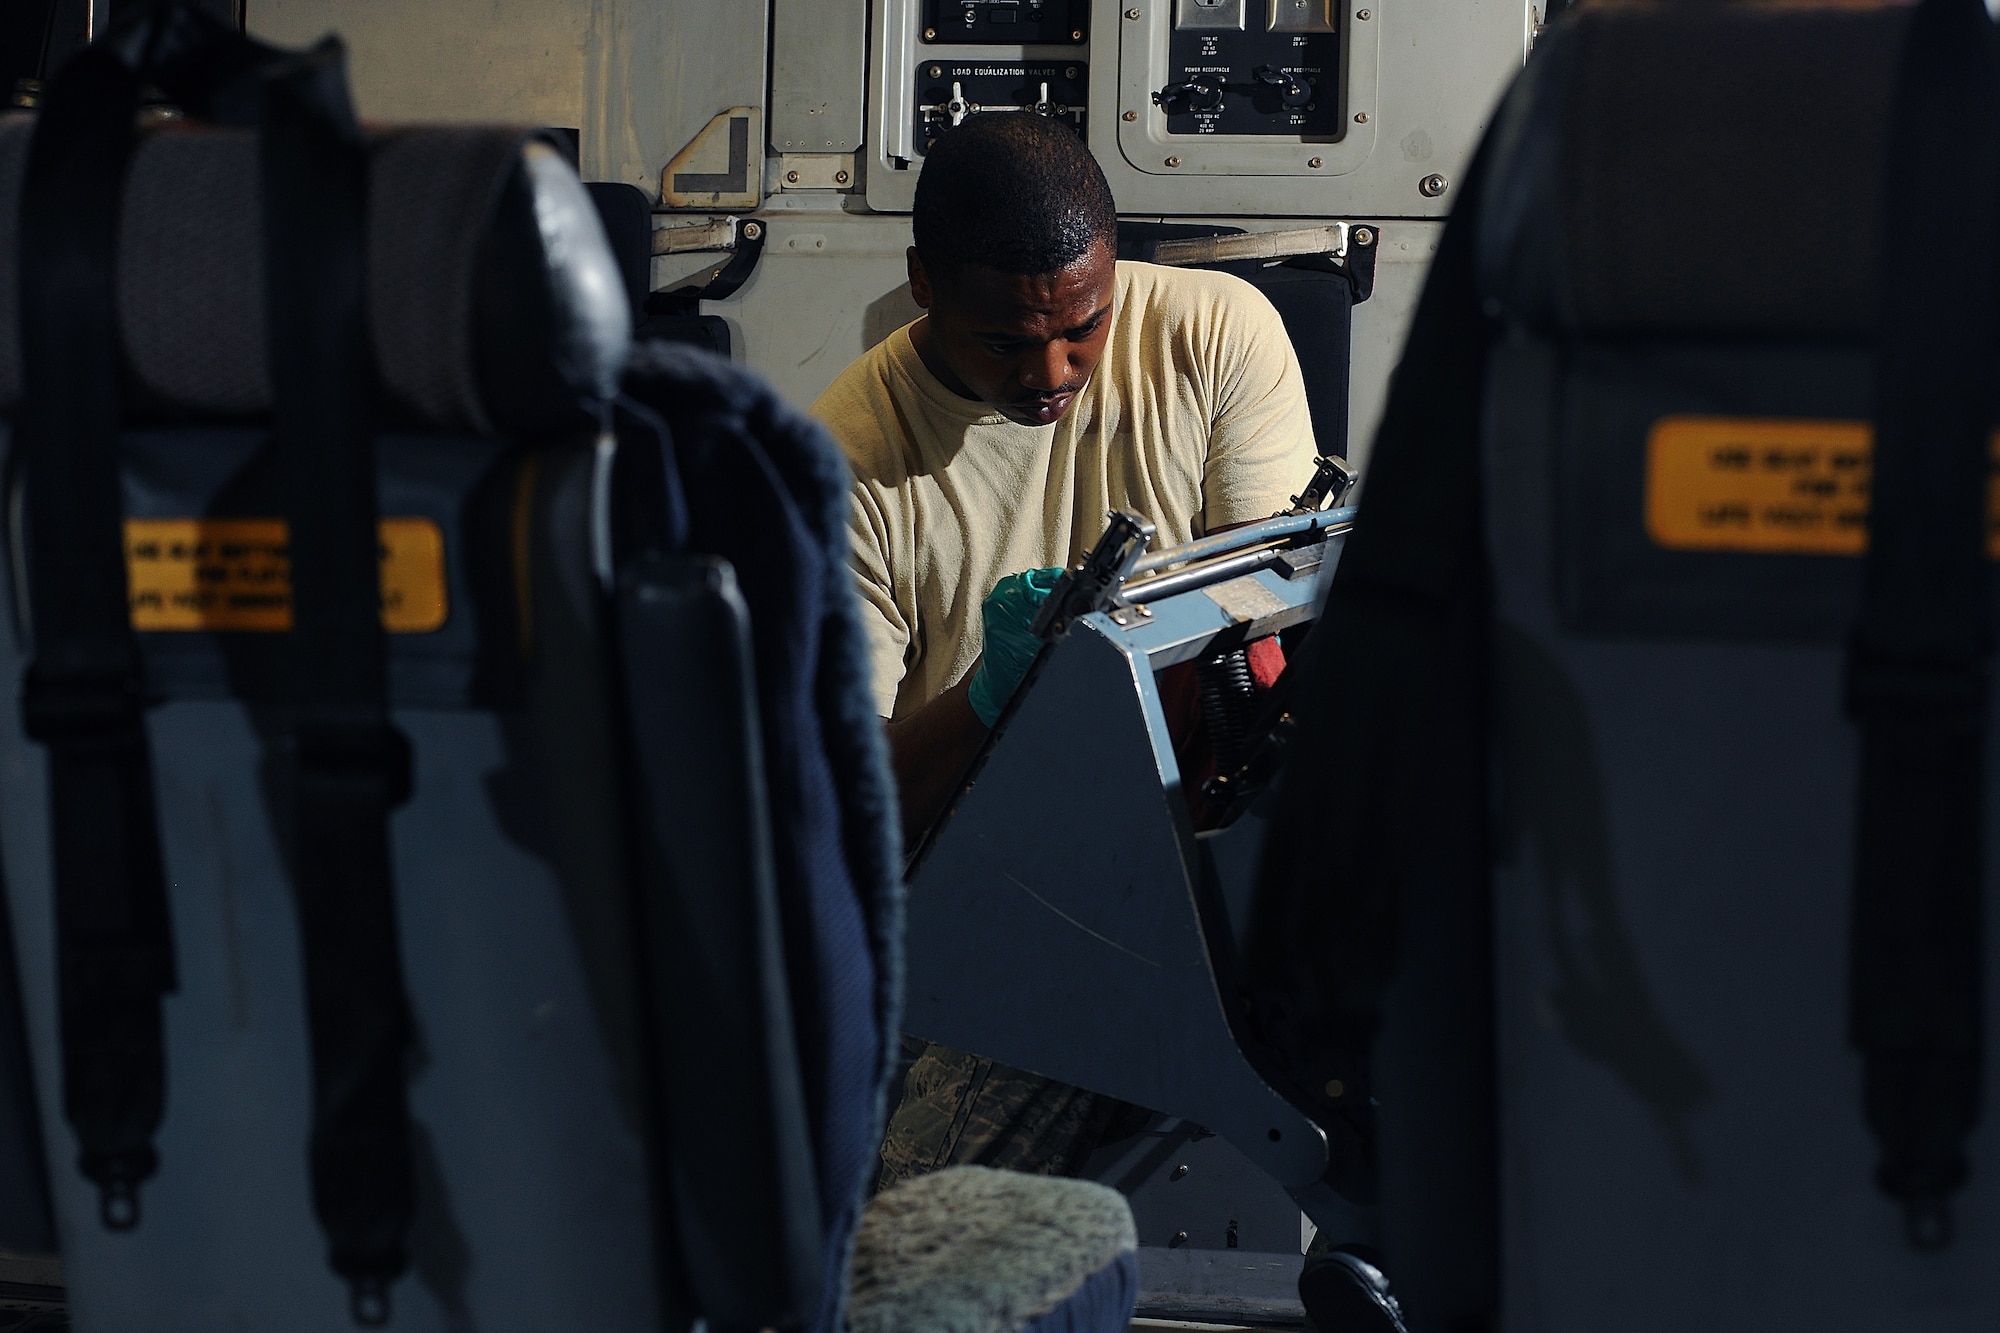 ALTUS AIR FORCE BASE, Okla. -- Senior Airman Brinson Emanuel, 97th Air Mobility Wing Maintenance Division crew chief, reconfigures the seats of a C-17 Globemaster III cargo aircraft during a 720-day home station refurbishing Oct. 10, 2013.  The recalibration of the seats helps to maintain the functionality of the seats’ components. The renovation ensures the workings of the aircraft are mission ready before returning to the field. (U.S. Air Force photo by Senior Airman Jesse Lopez/Released)